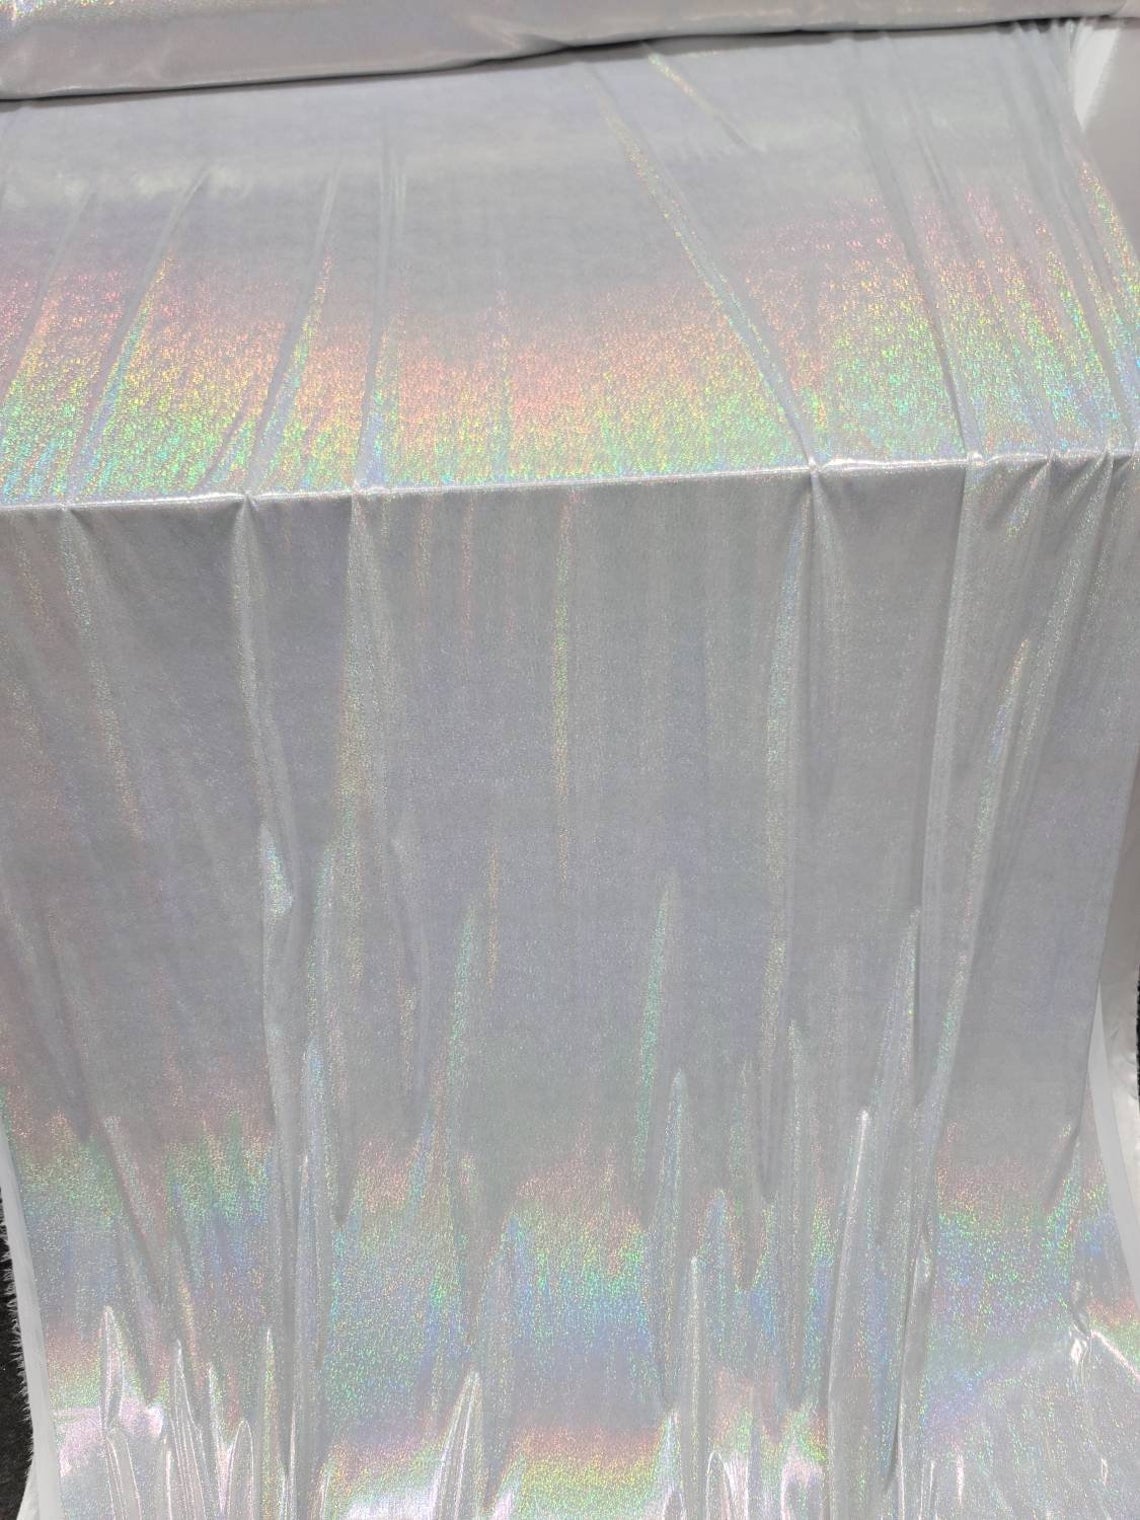 Silver Cosplay Holographic Stretch Patent Vinyl Spandex Fabric